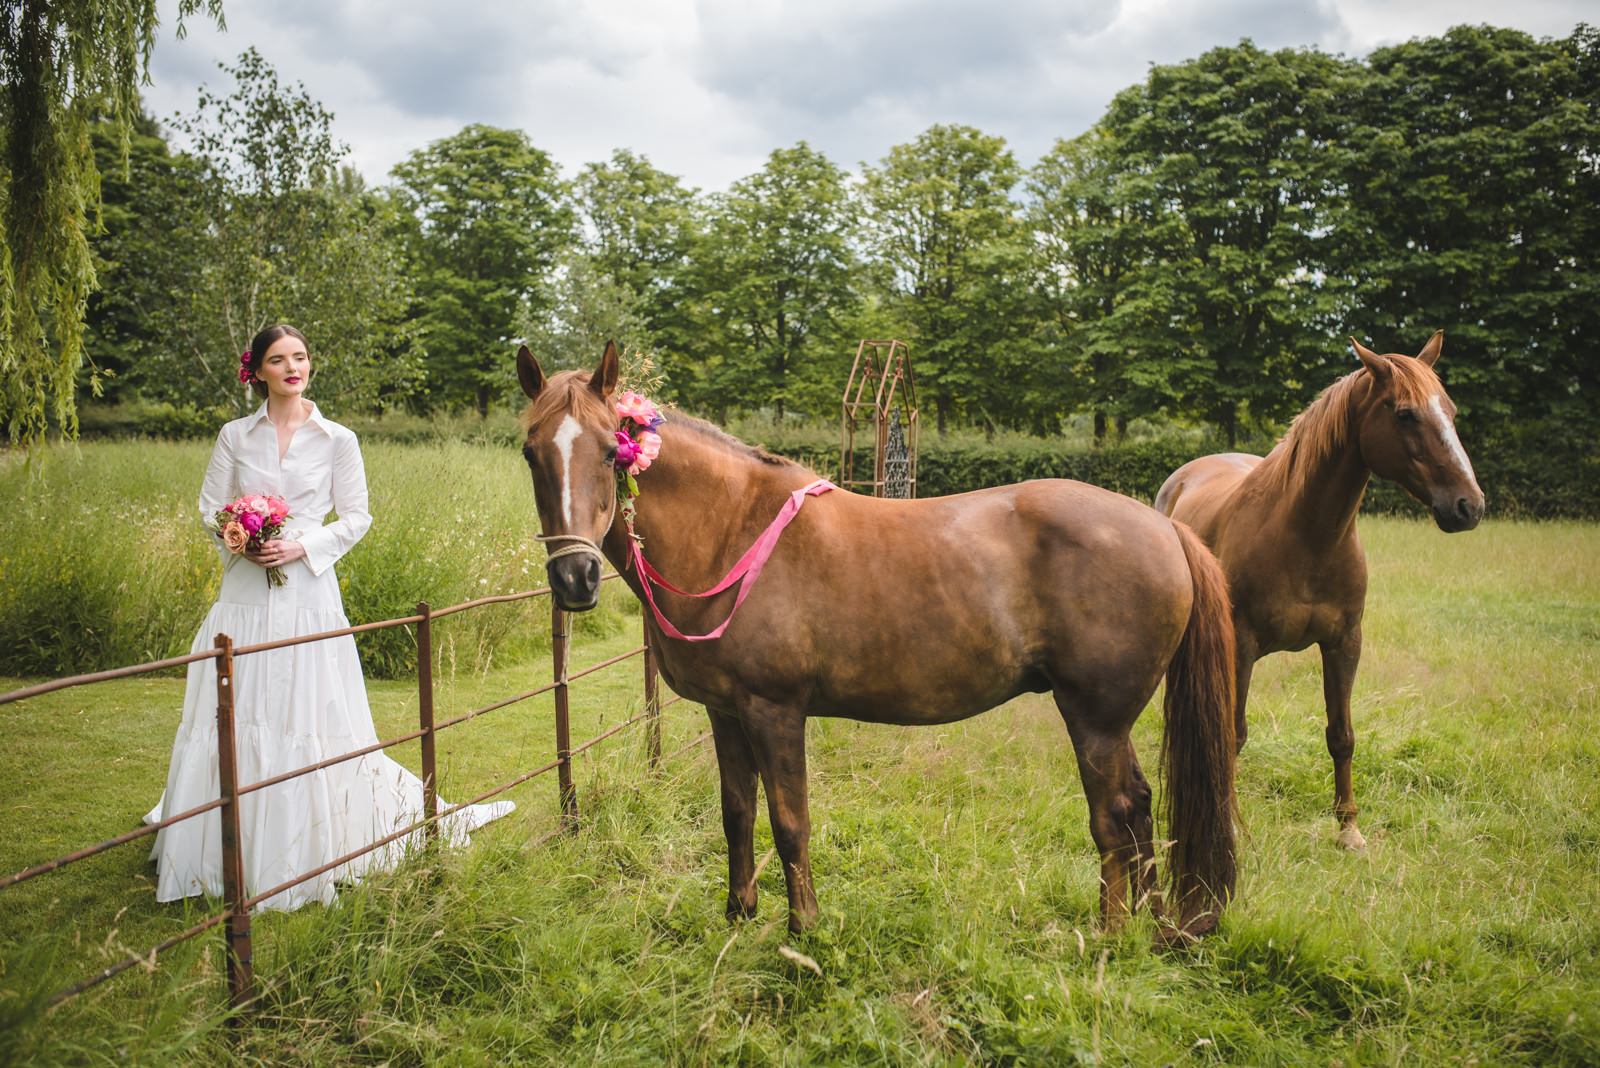 Bridal shoot by Juliet Mckee Photography featuring horses and florals.